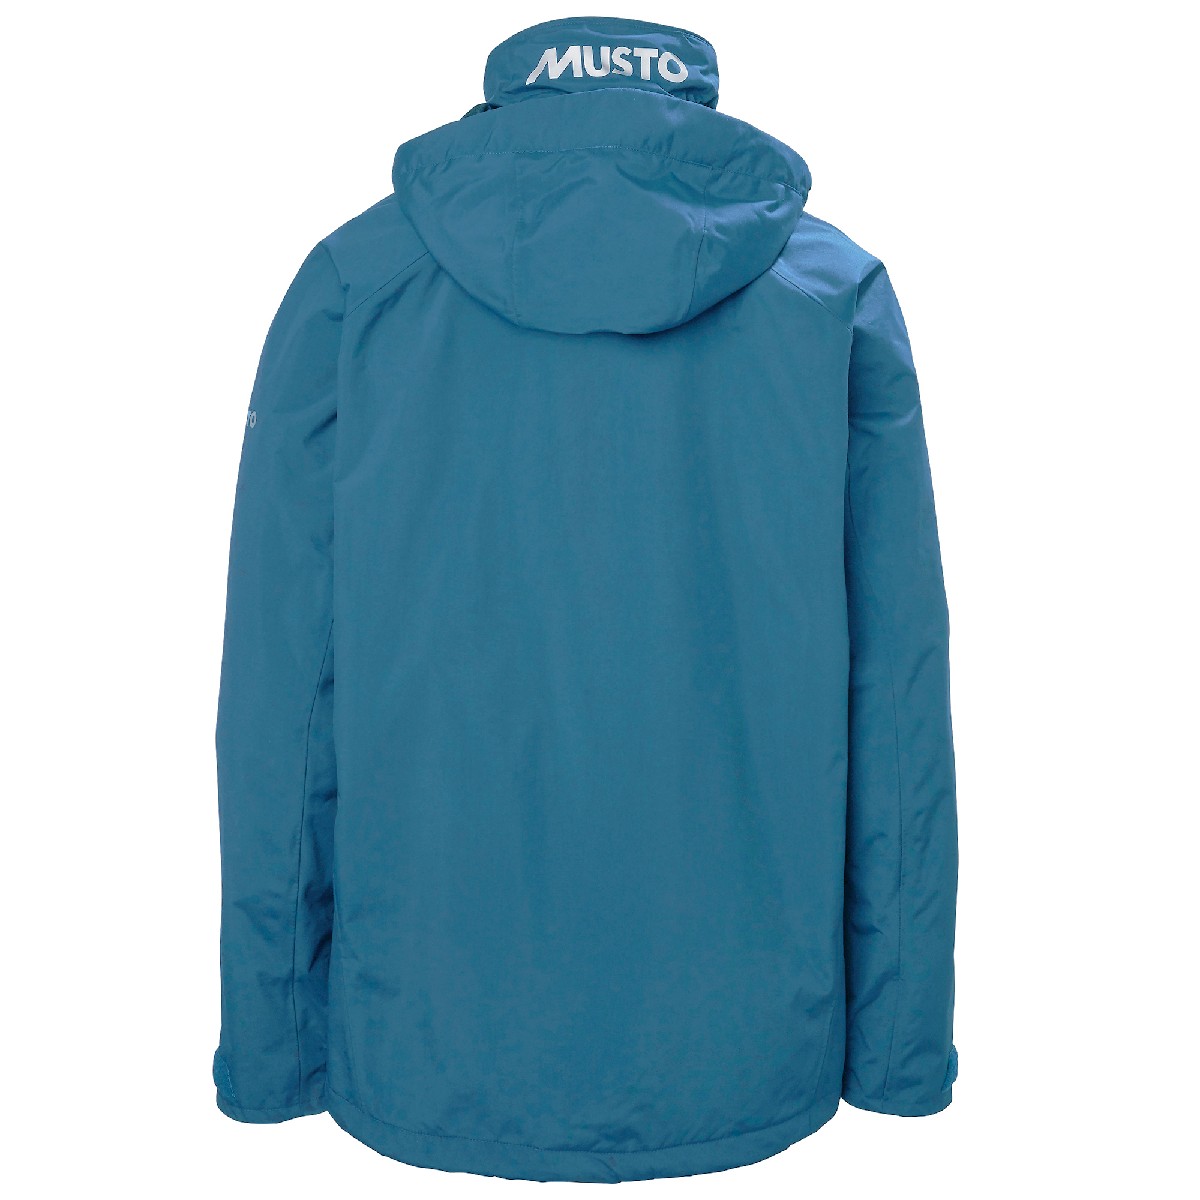 Musto Corsica Jacket 2.0 Cove Blue | Captain Watts Chandlery